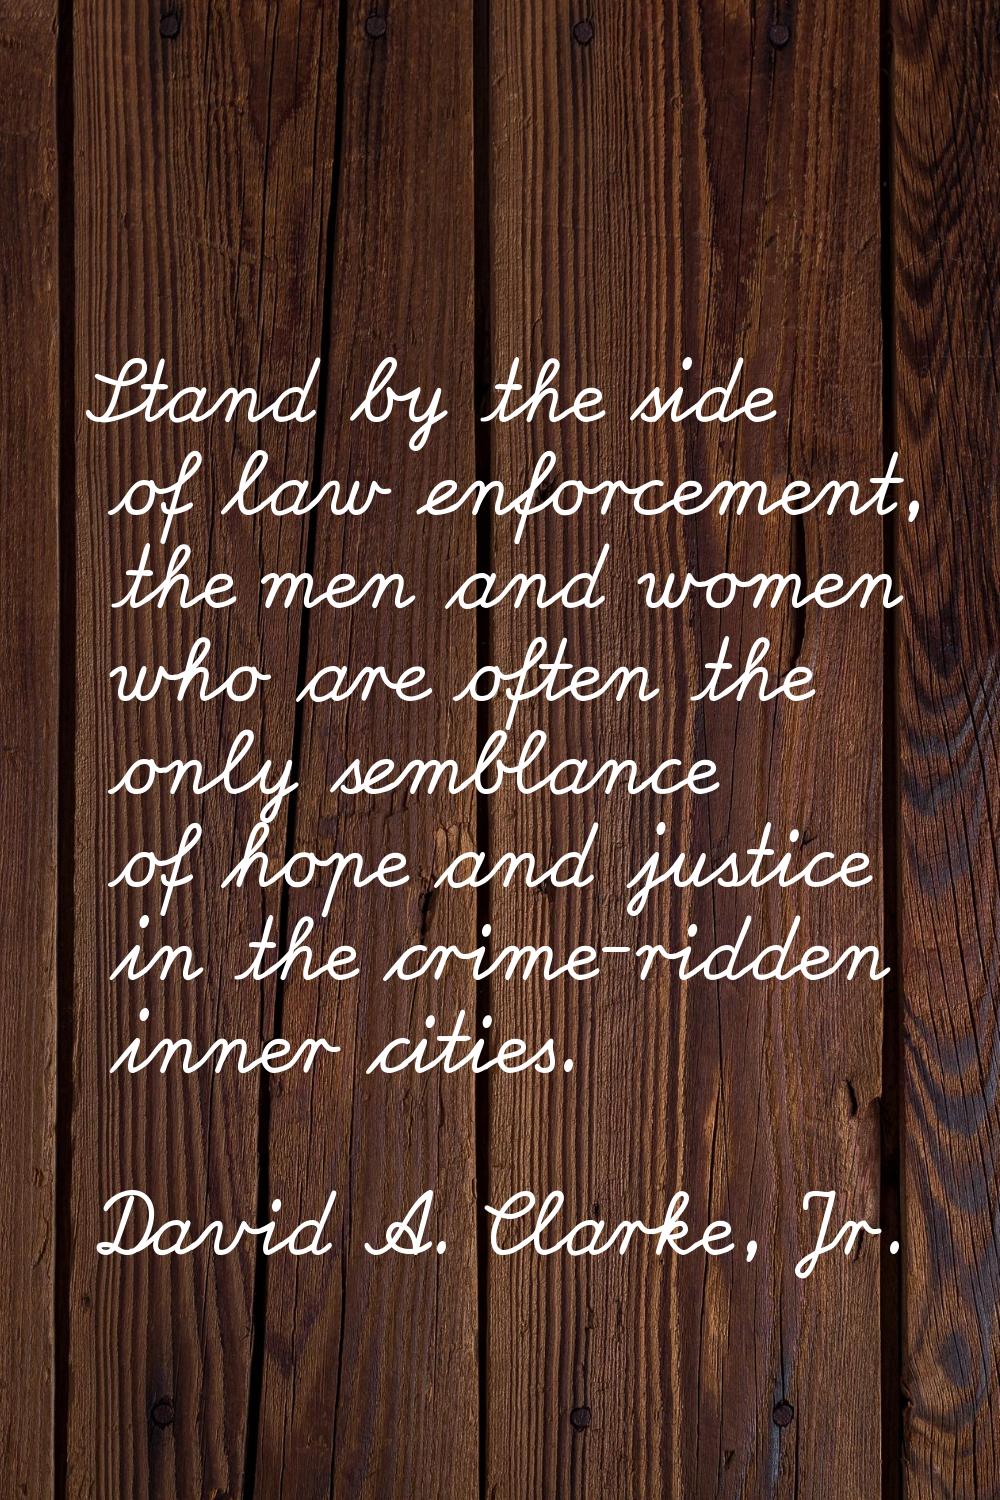 Stand by the side of law enforcement, the men and women who are often the only semblance of hope an